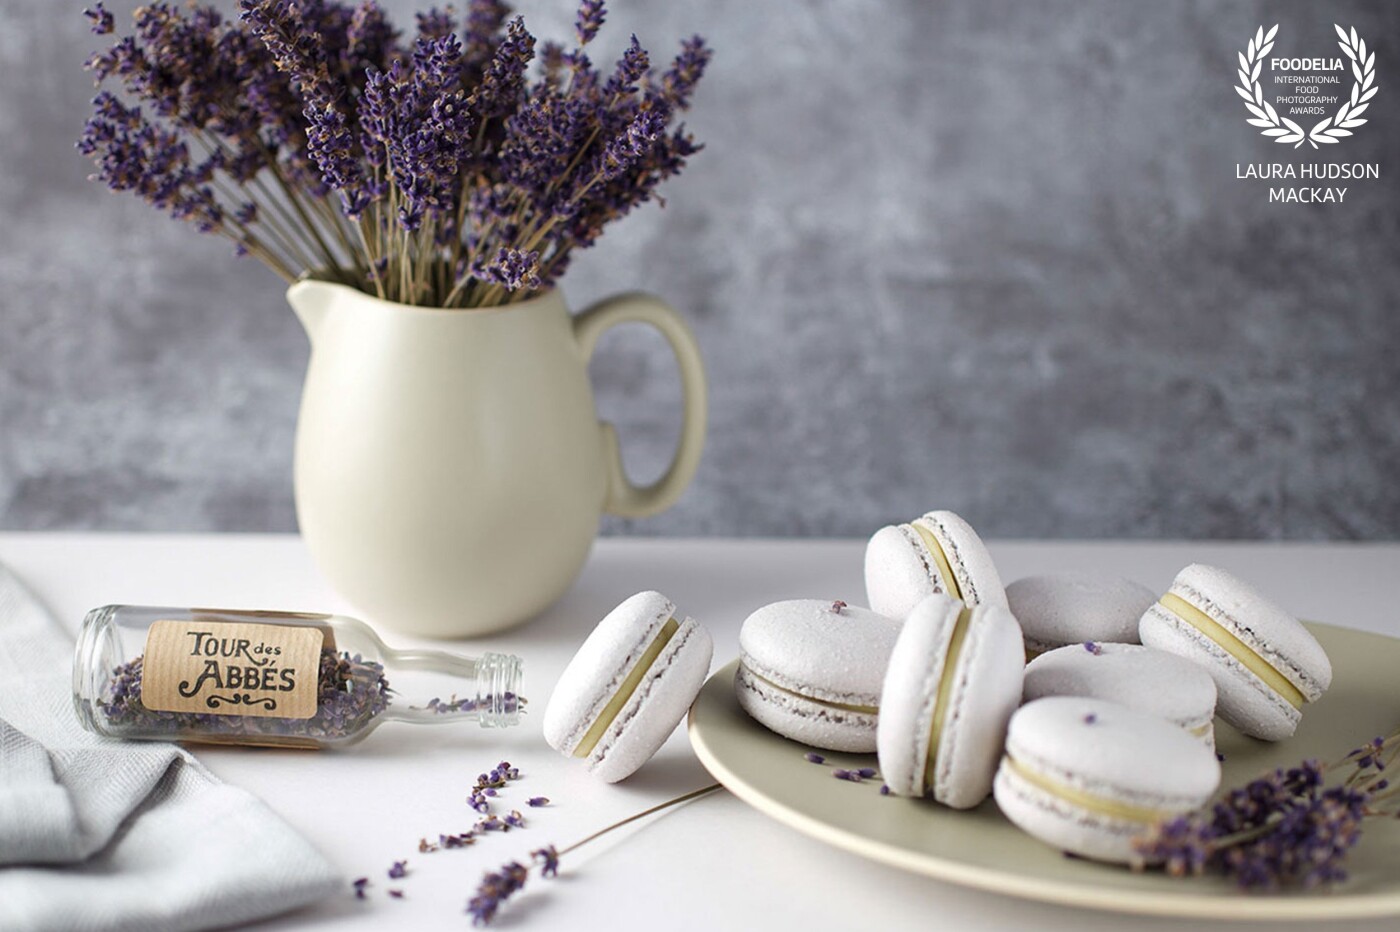 These lavender and gooseberry macarons were made using edible lavender from my garden. The crockery is Wedgewood by Vera Wang which I’ve had on my prop shelf for a while. When I saw the colour of the gooseberry filling I knew it was time to use them. 